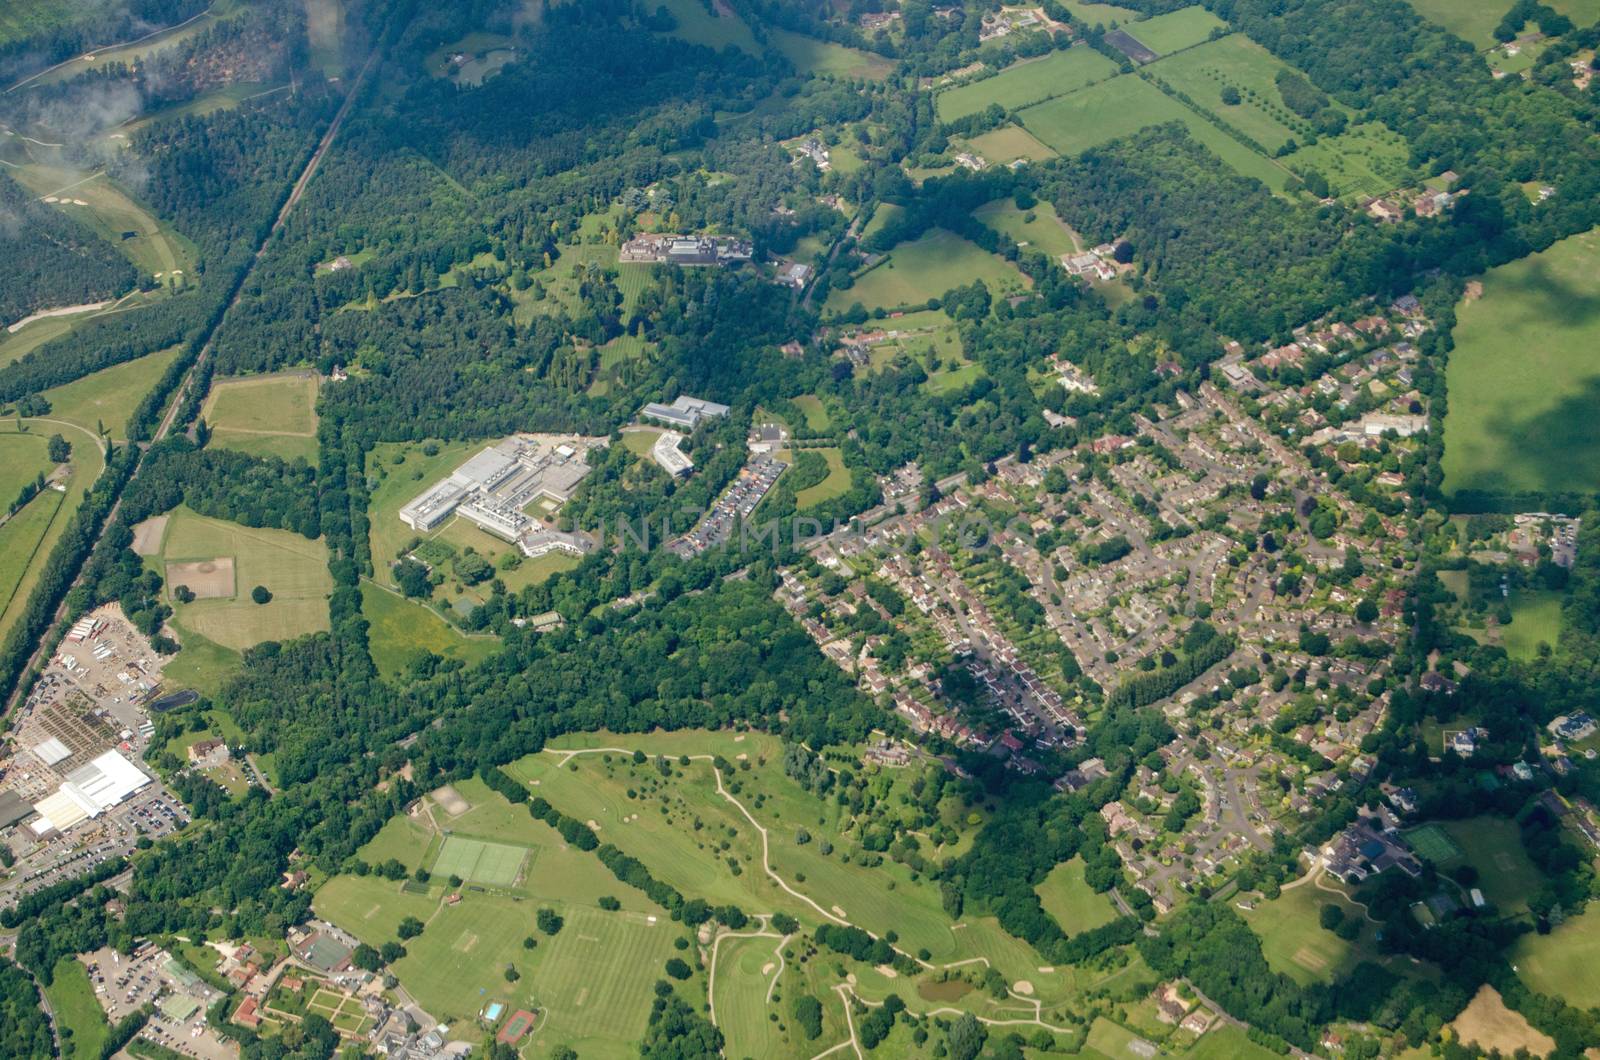 Aerial view of part of the Surrey village of Windlesham.  Together with housing and a golf course, the research and development site of the pharmaceutical company Eli Lilly is visible in the centre of the image.  